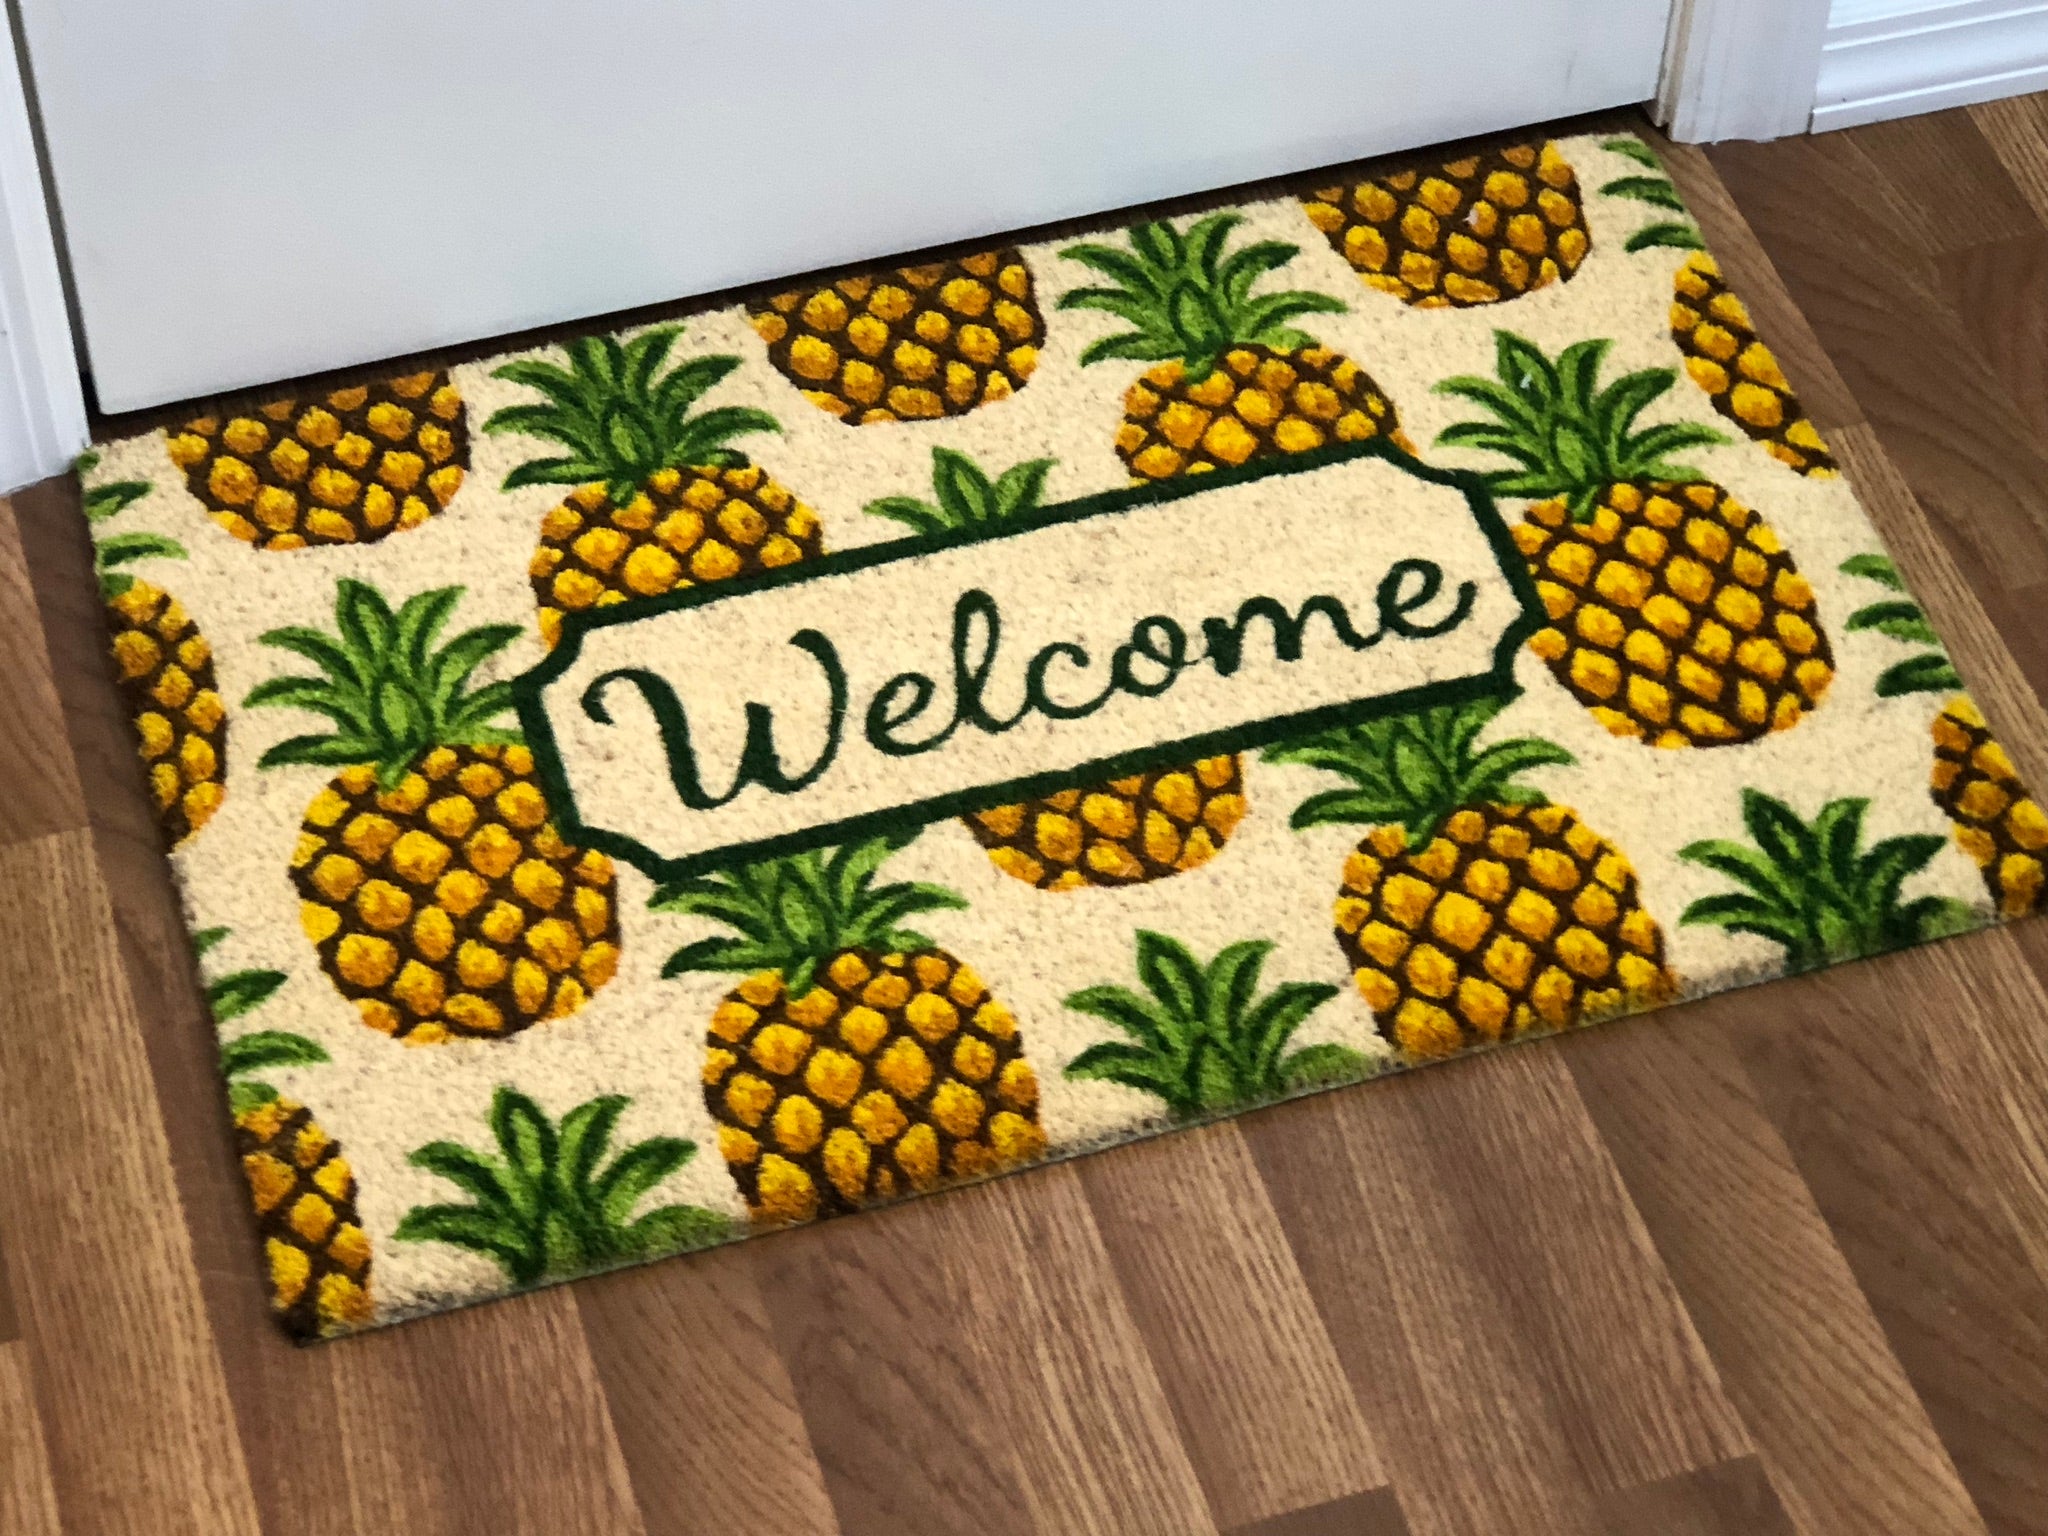 pineapple welcome symbol